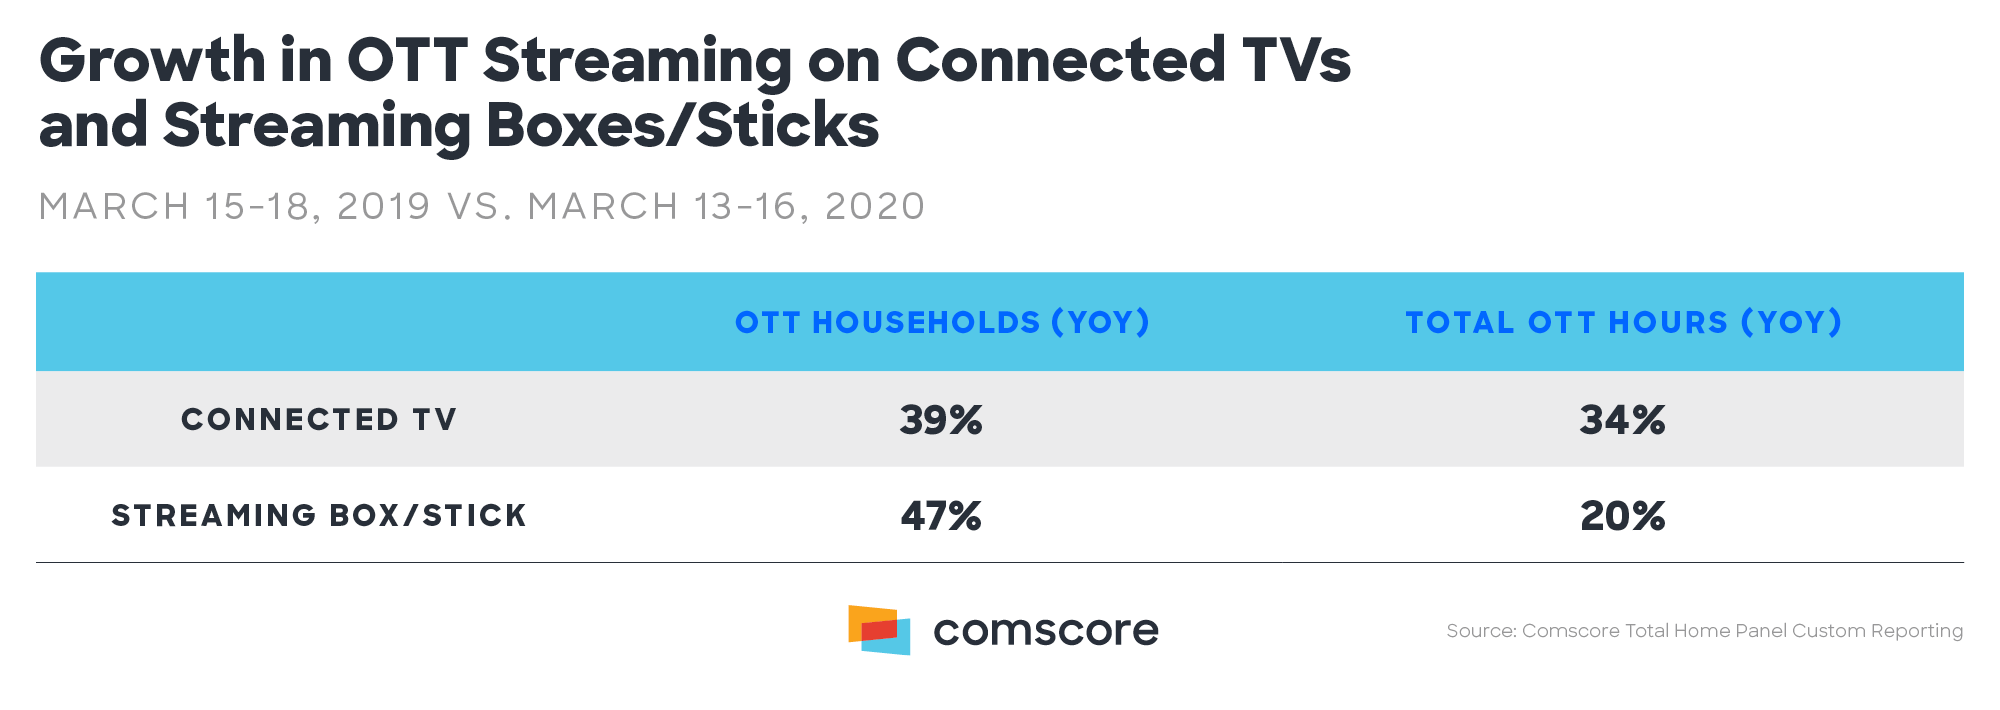 Coronavirus - Growth in Connected TV and streaming boxes/sticks March 15